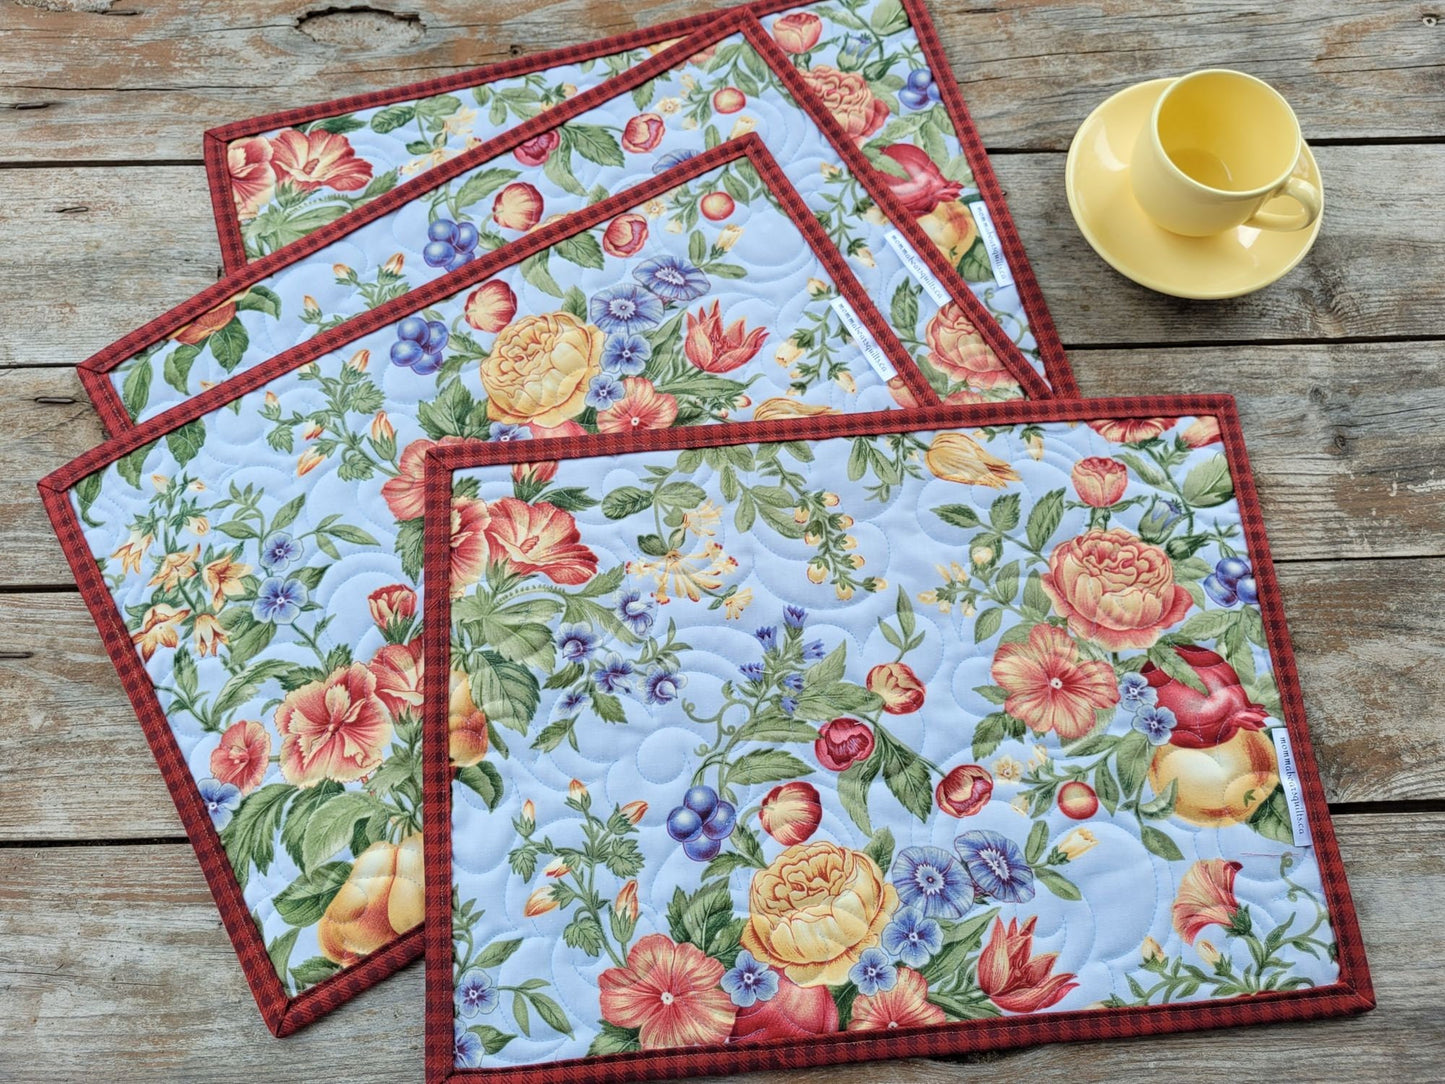 reversible side of quilted placemat set has lovely floral print